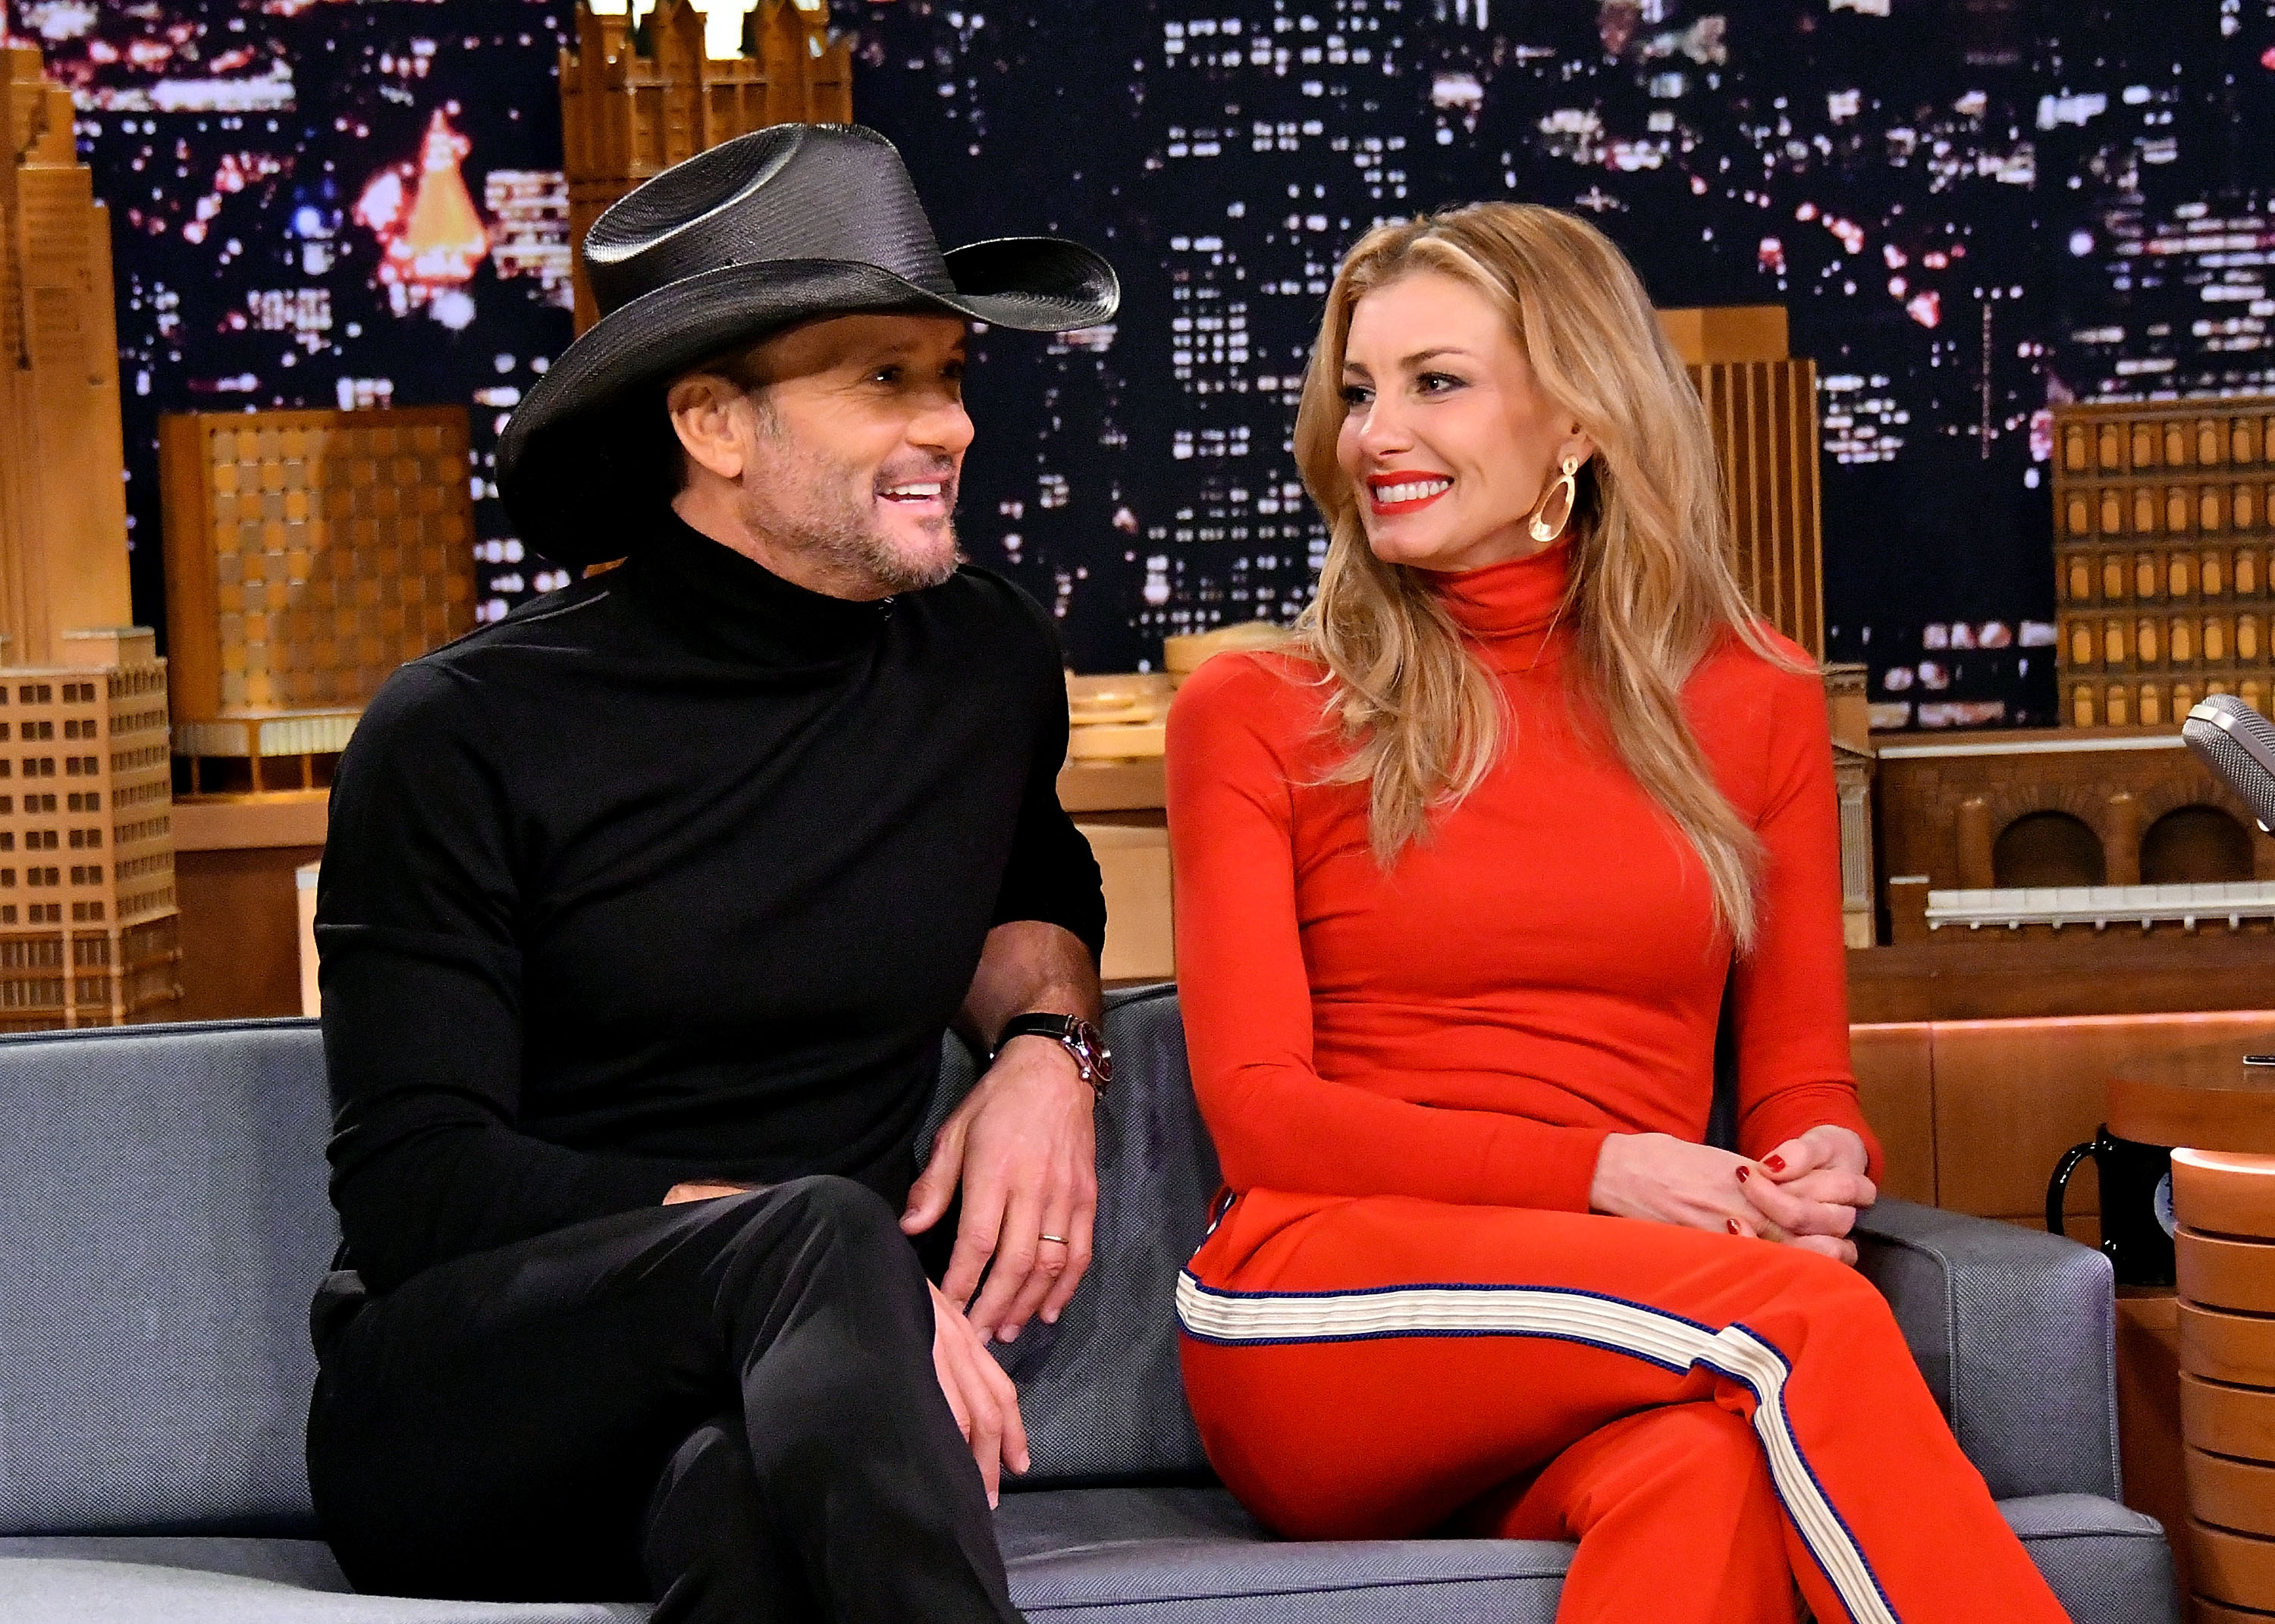 Singer/songwriter Tim McGraw (L) and wife/singer Faith Hill are interviewed on "The Tonight Show Starring Jimmy Fallon" at Rockefeller Center on November 16, 2017 in New York City. | Getty Images